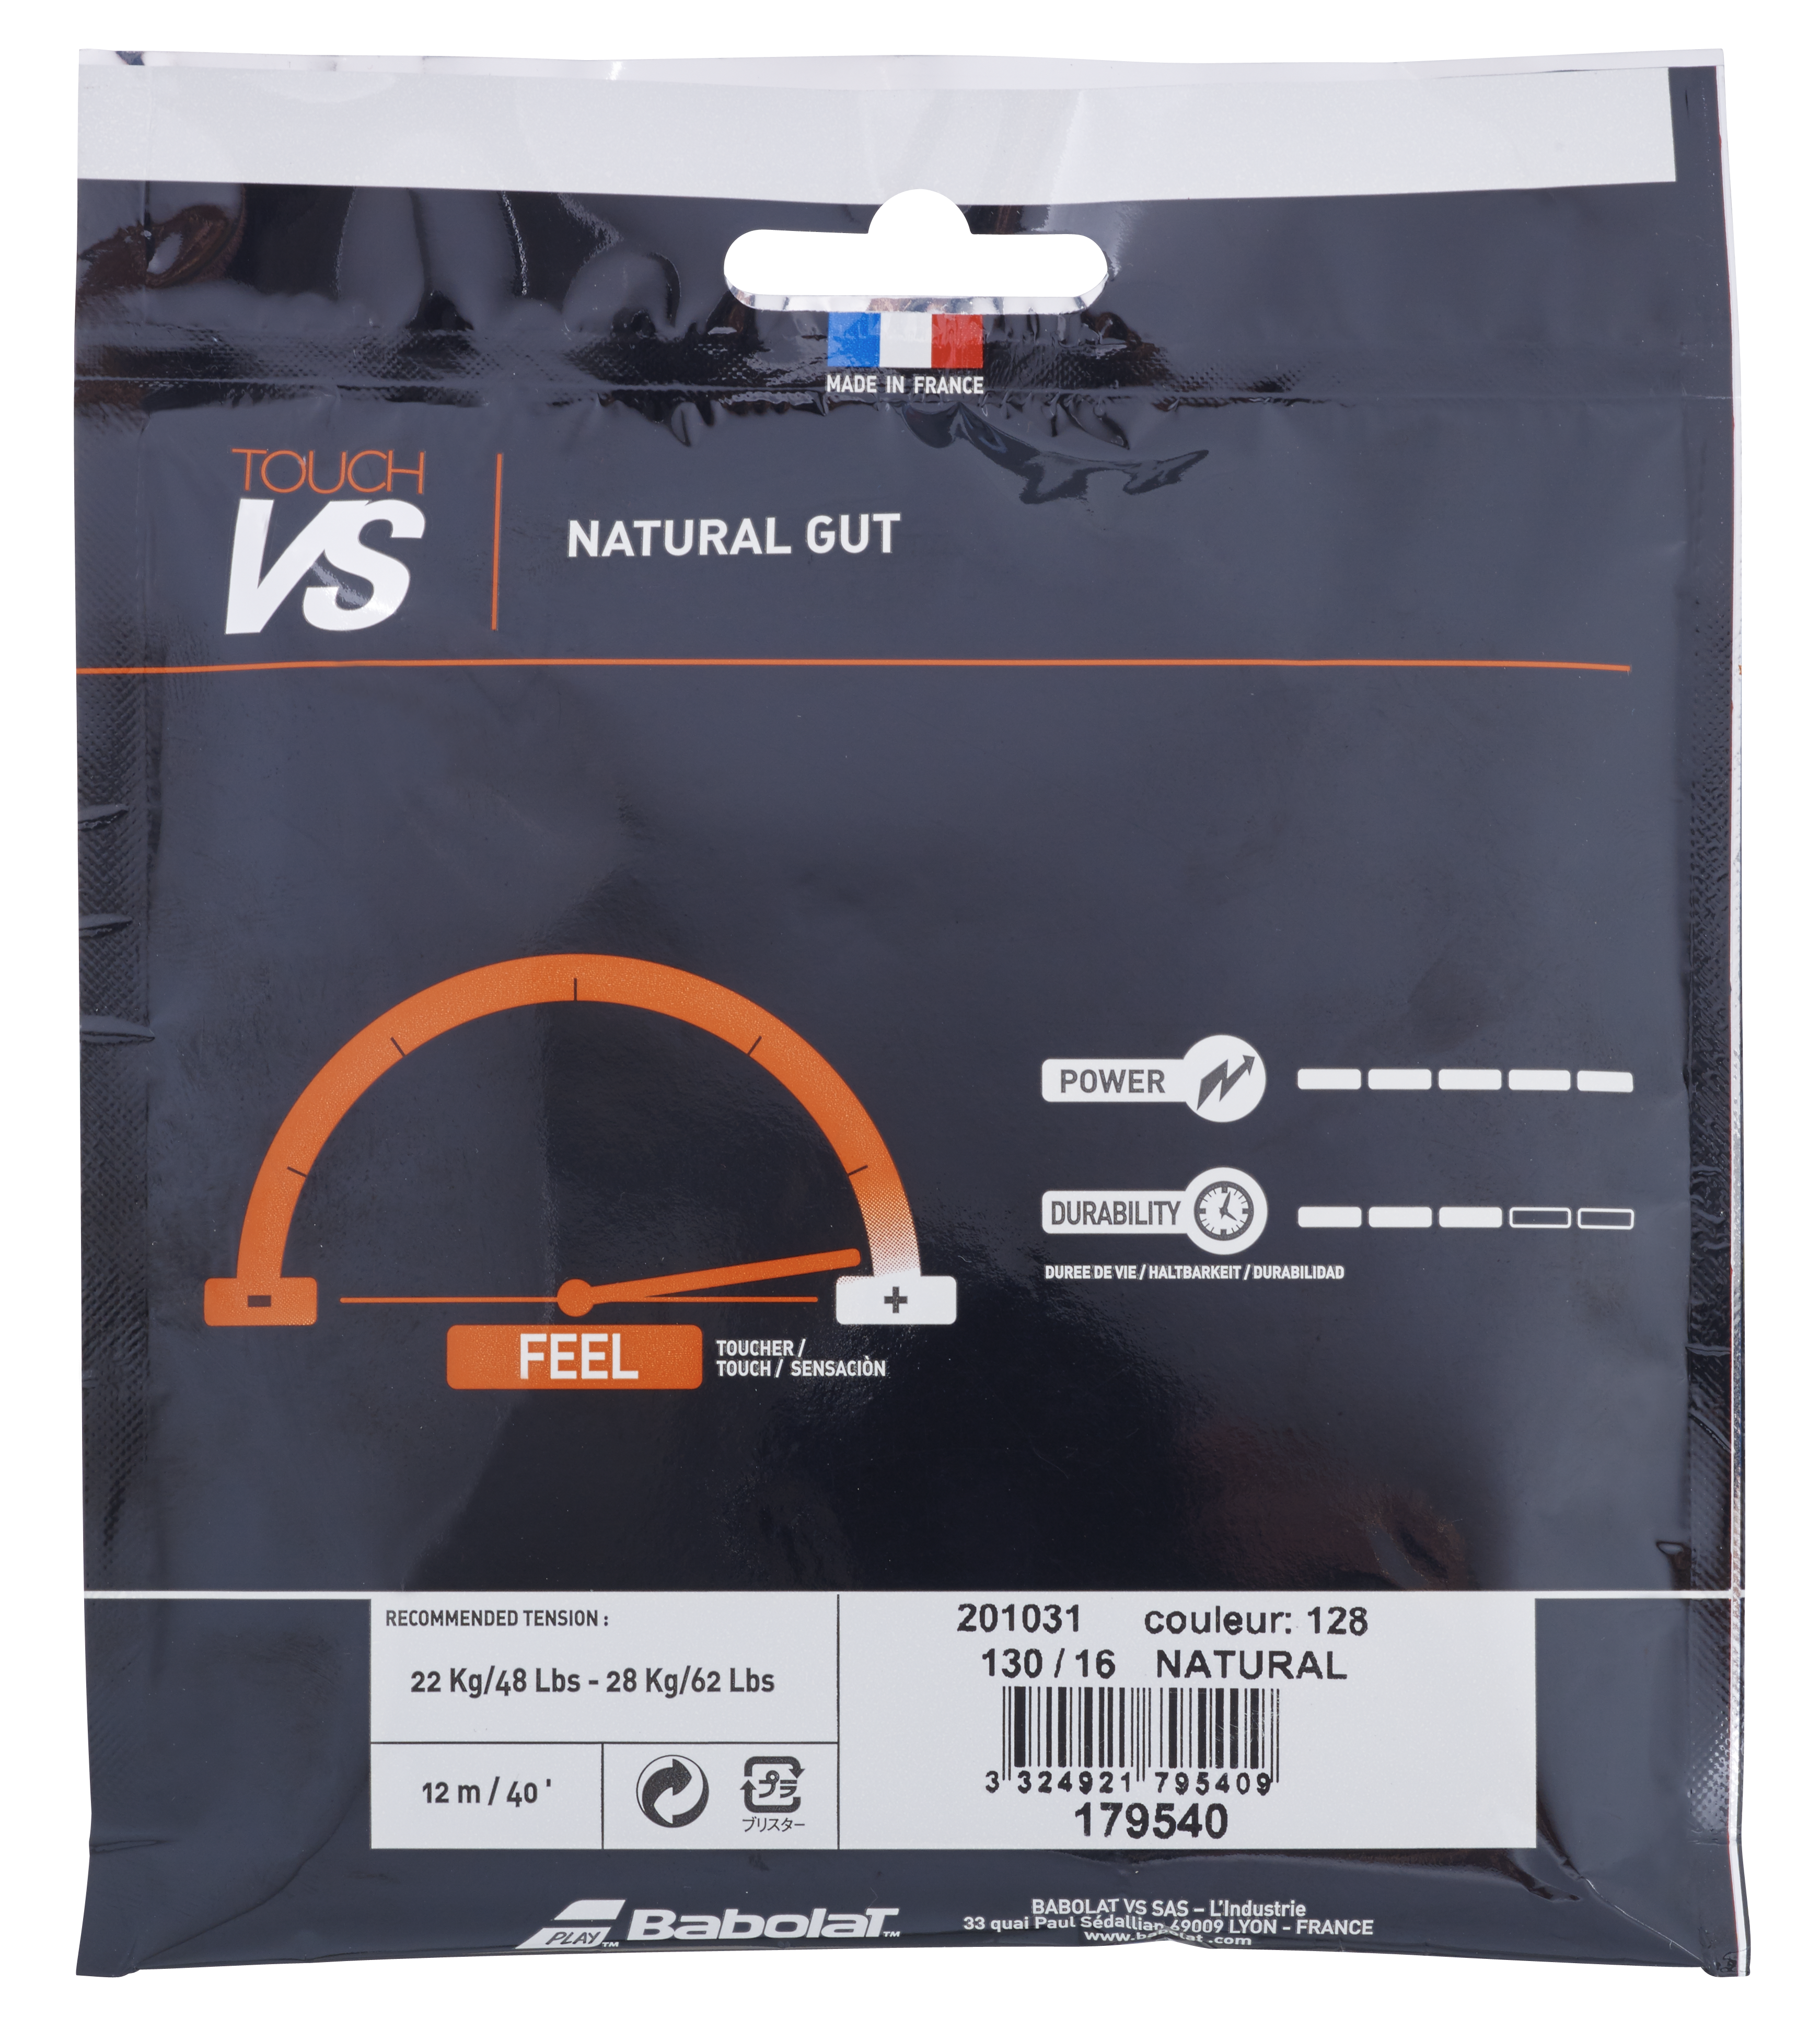 Touch Vs 12 Meter Natural Tennis String